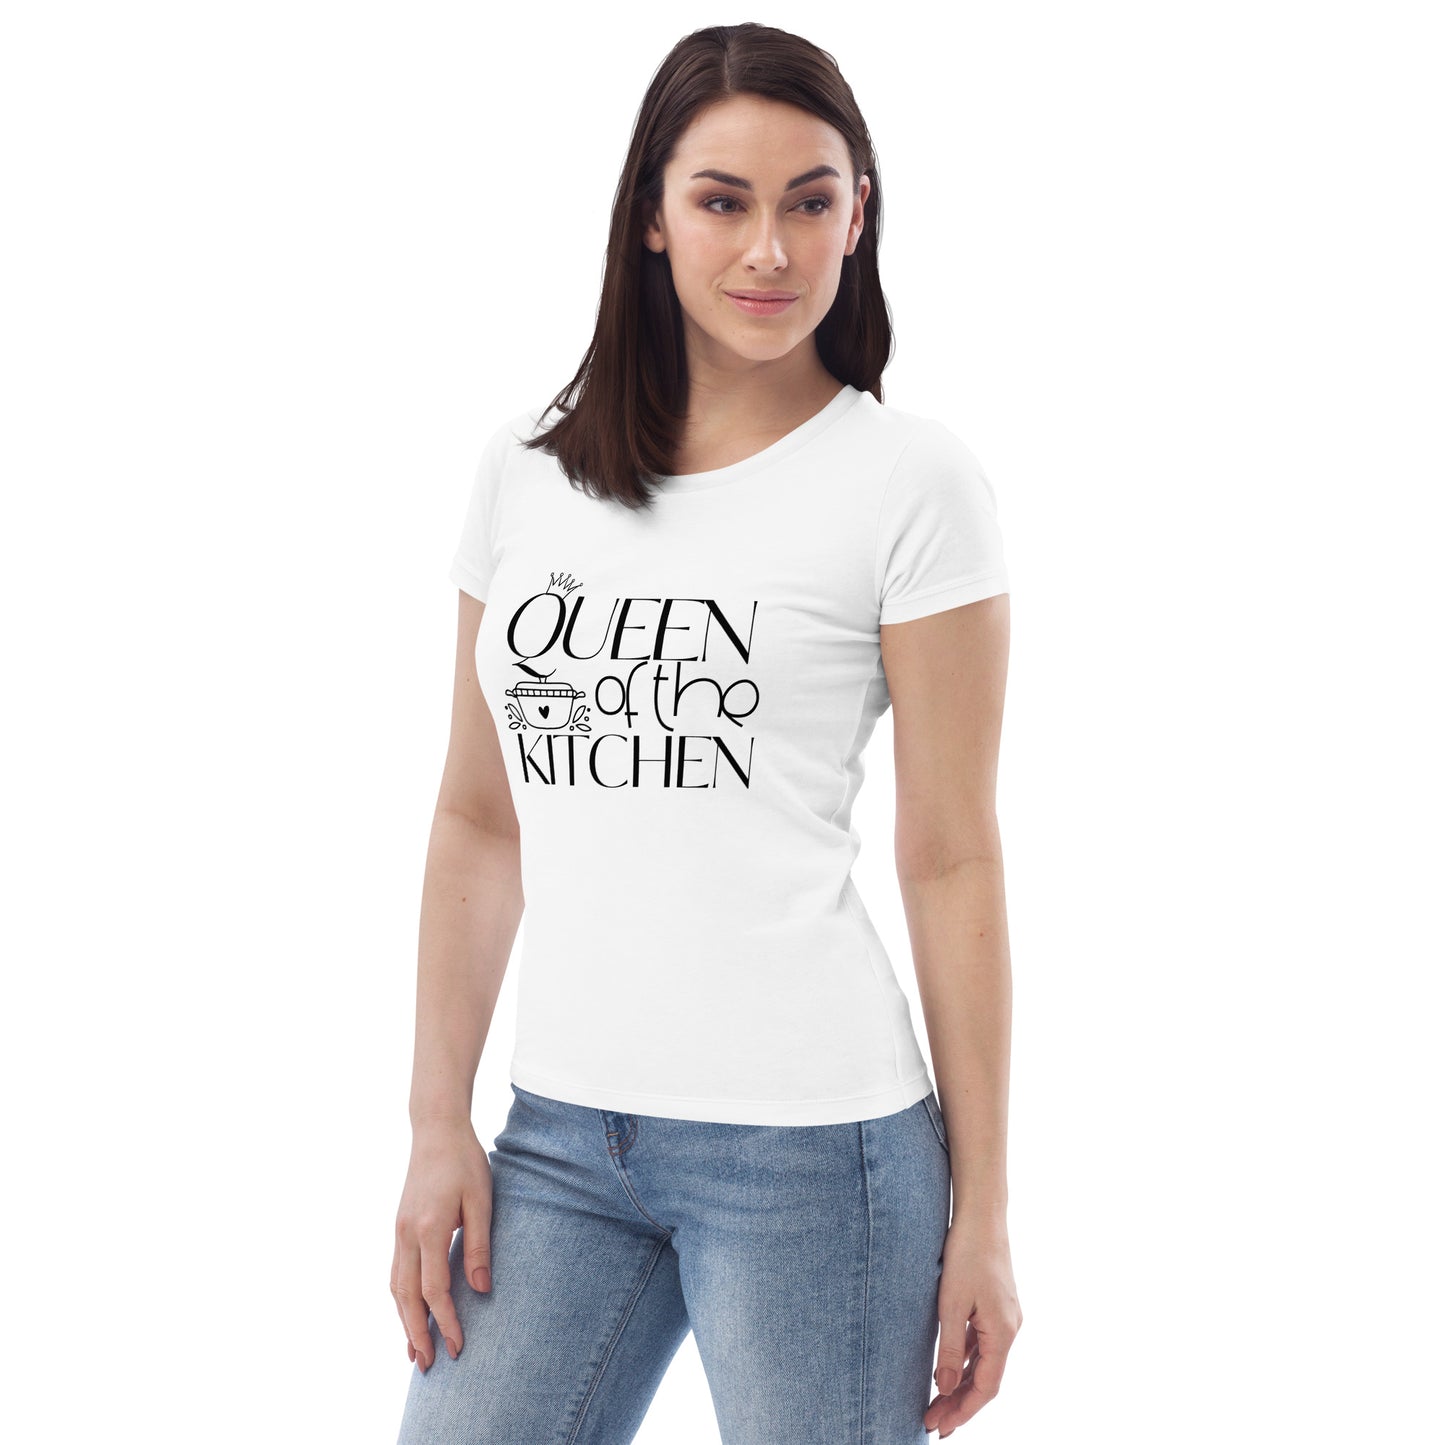 Queen of the kitchen - custom made 100% organic cotton T-Shirt. Perfect for the hobby chef. Color: white